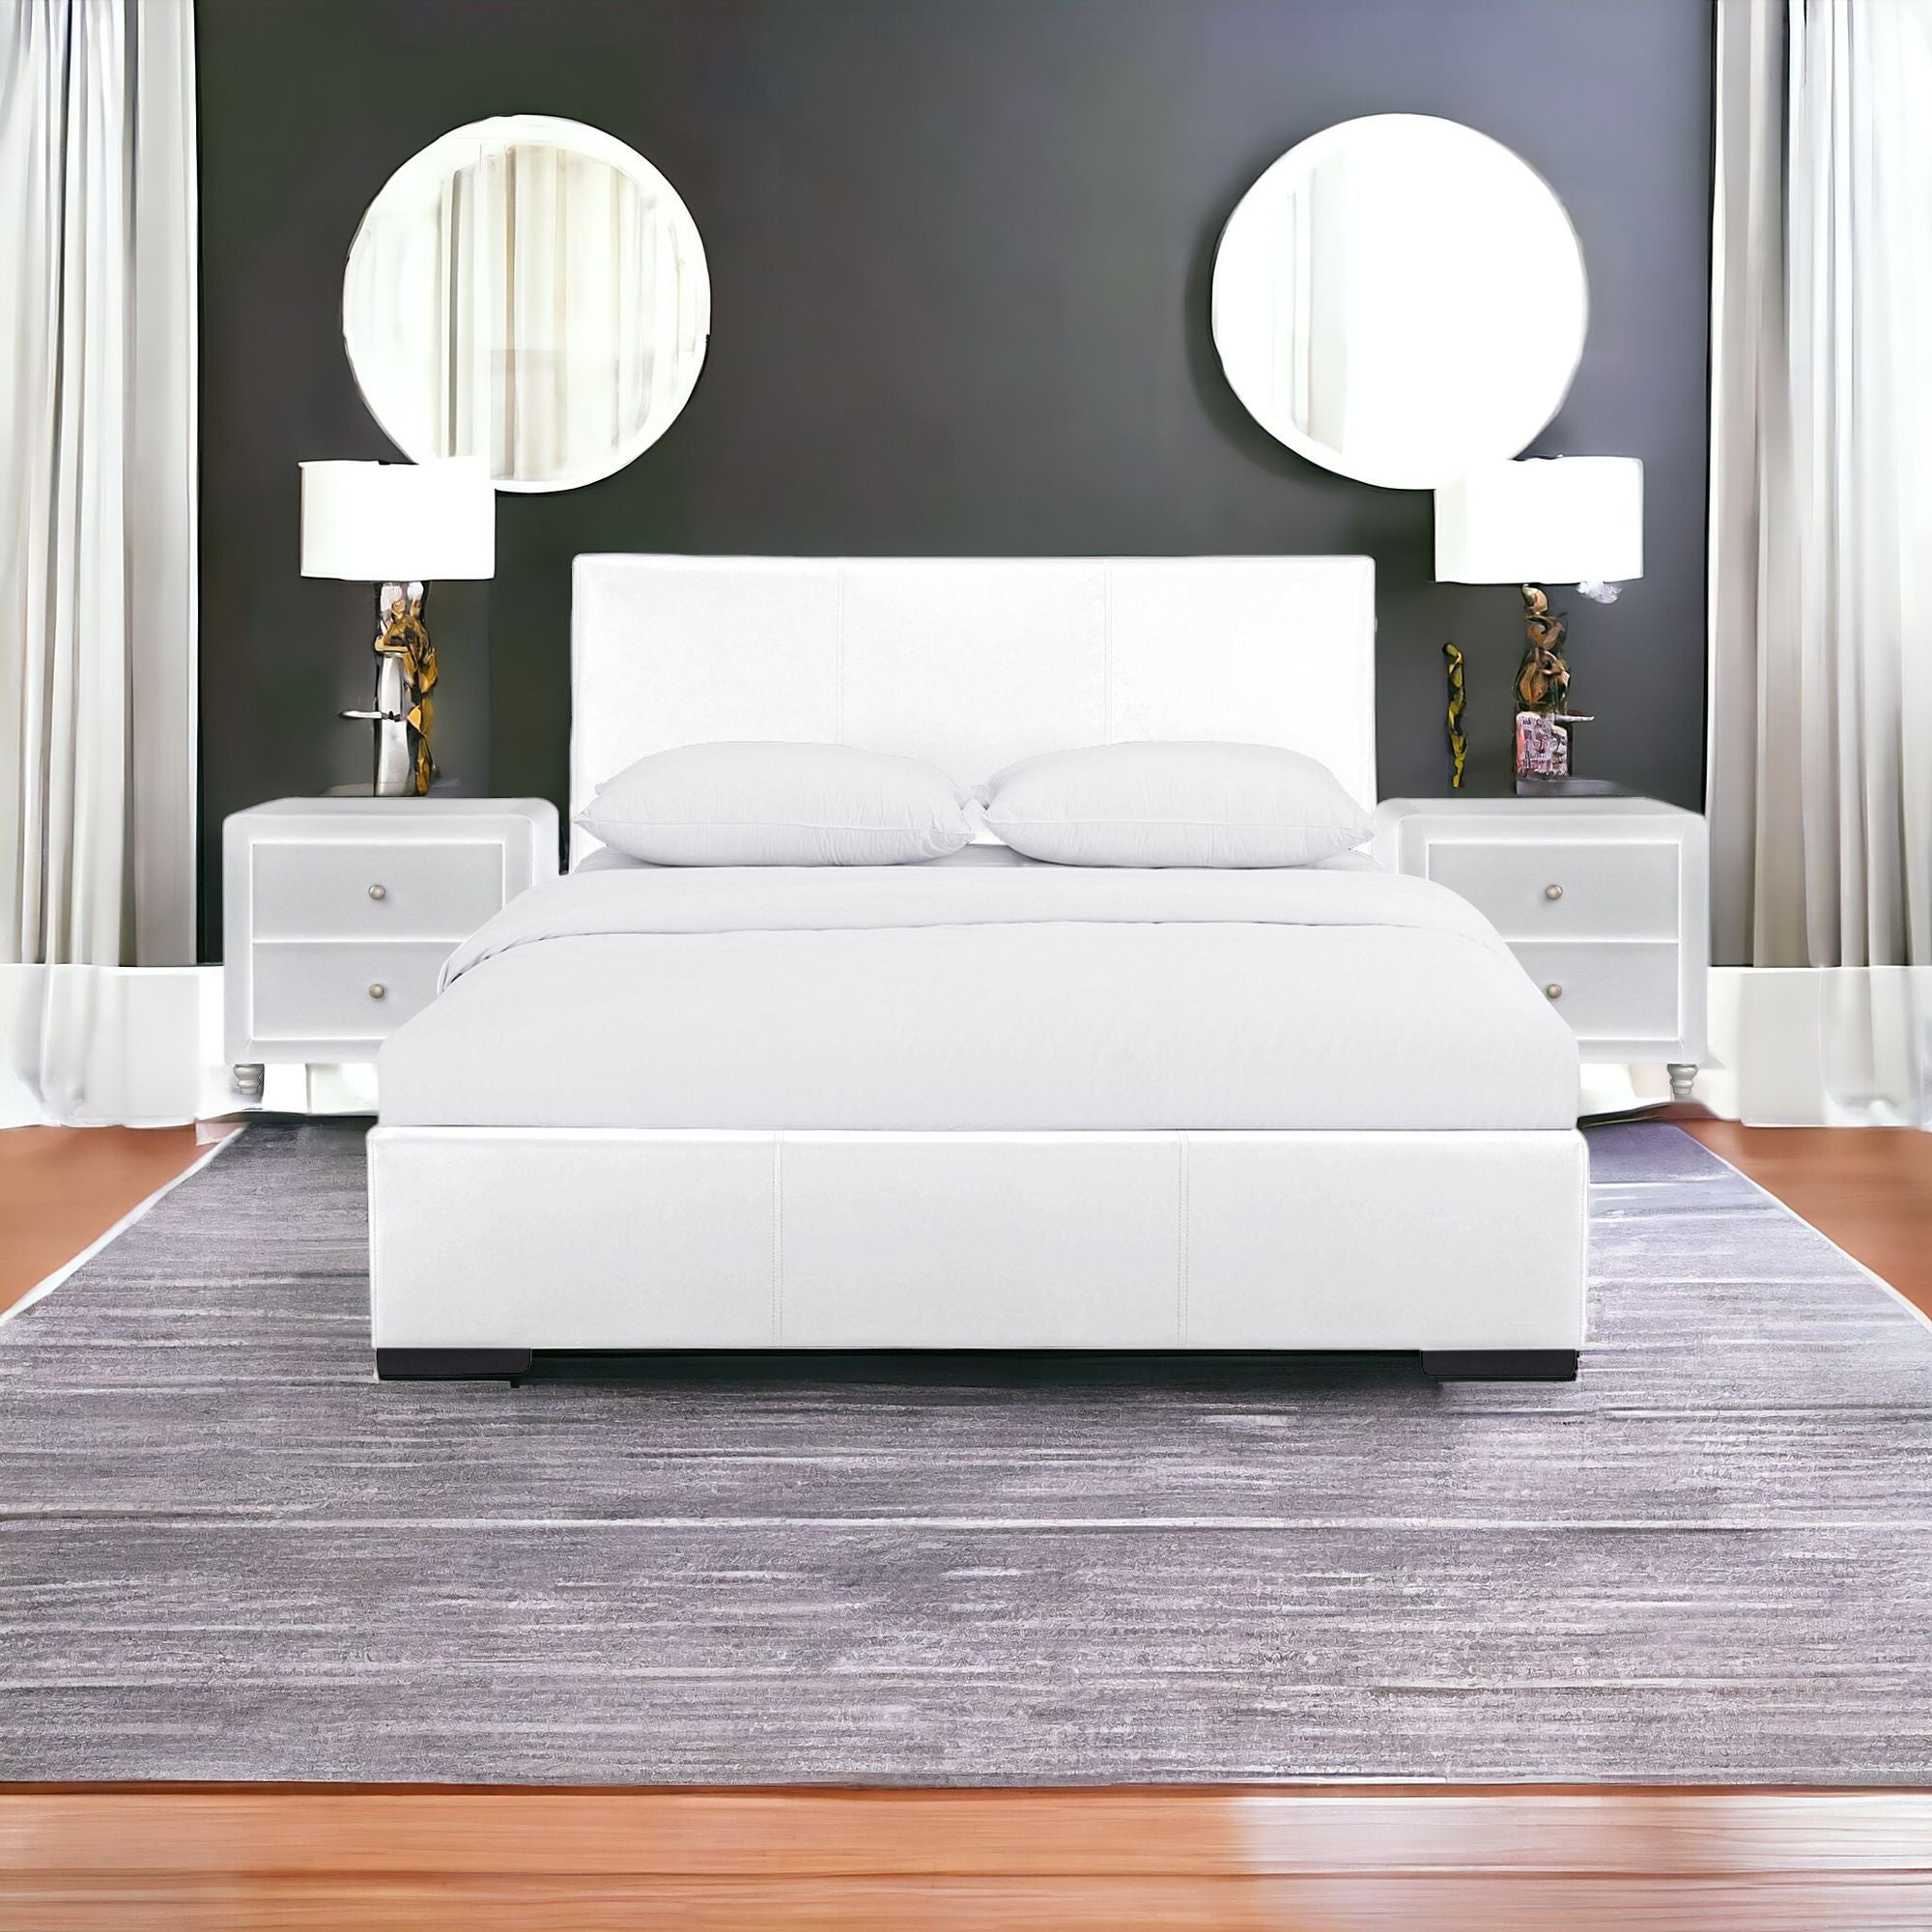 Black Upholstered Platform King Bed with Two Nightstands